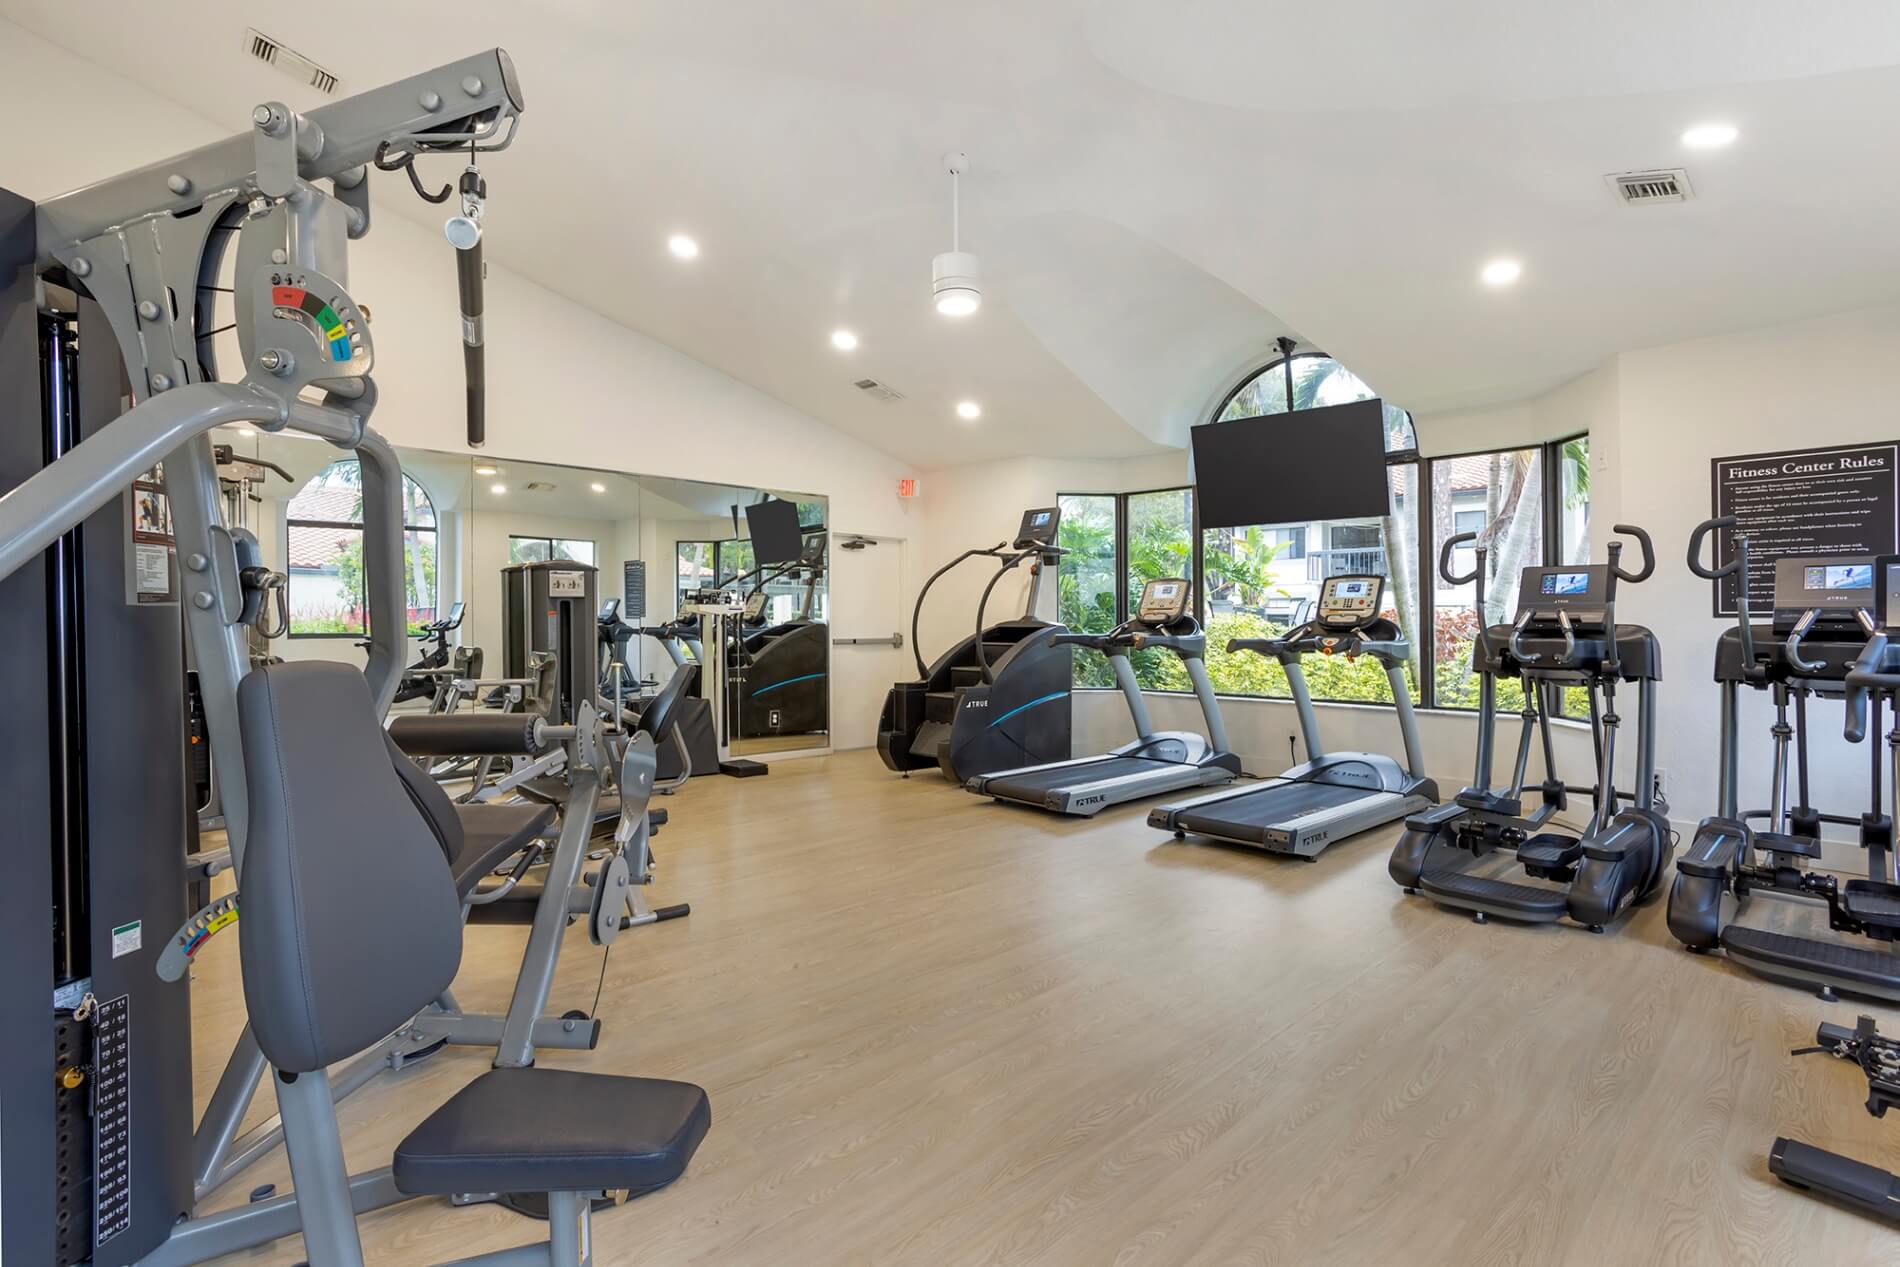 Fitness center with cardio and strength training equipment. Tv mounted on the wall.